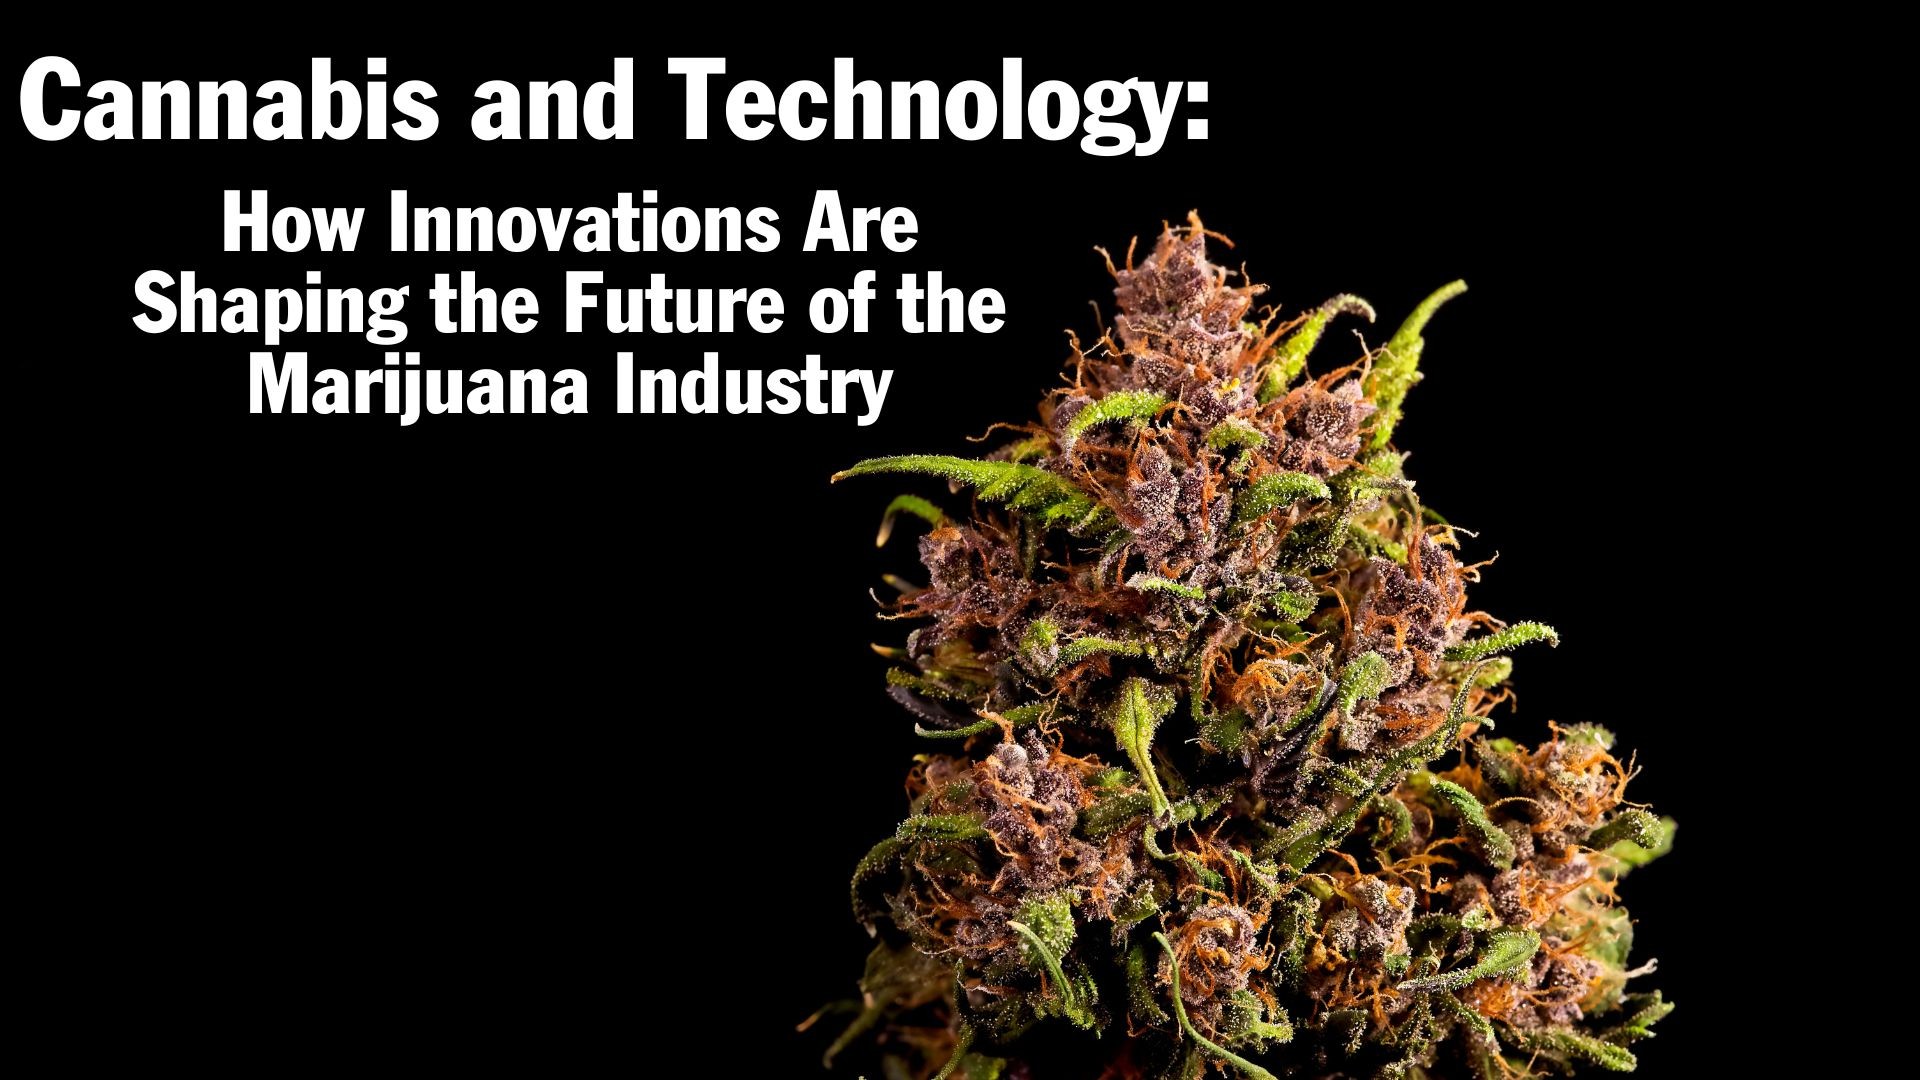 Cannabis and Technology: How Innovations Are Shaping the Future of the Marijuana Industry